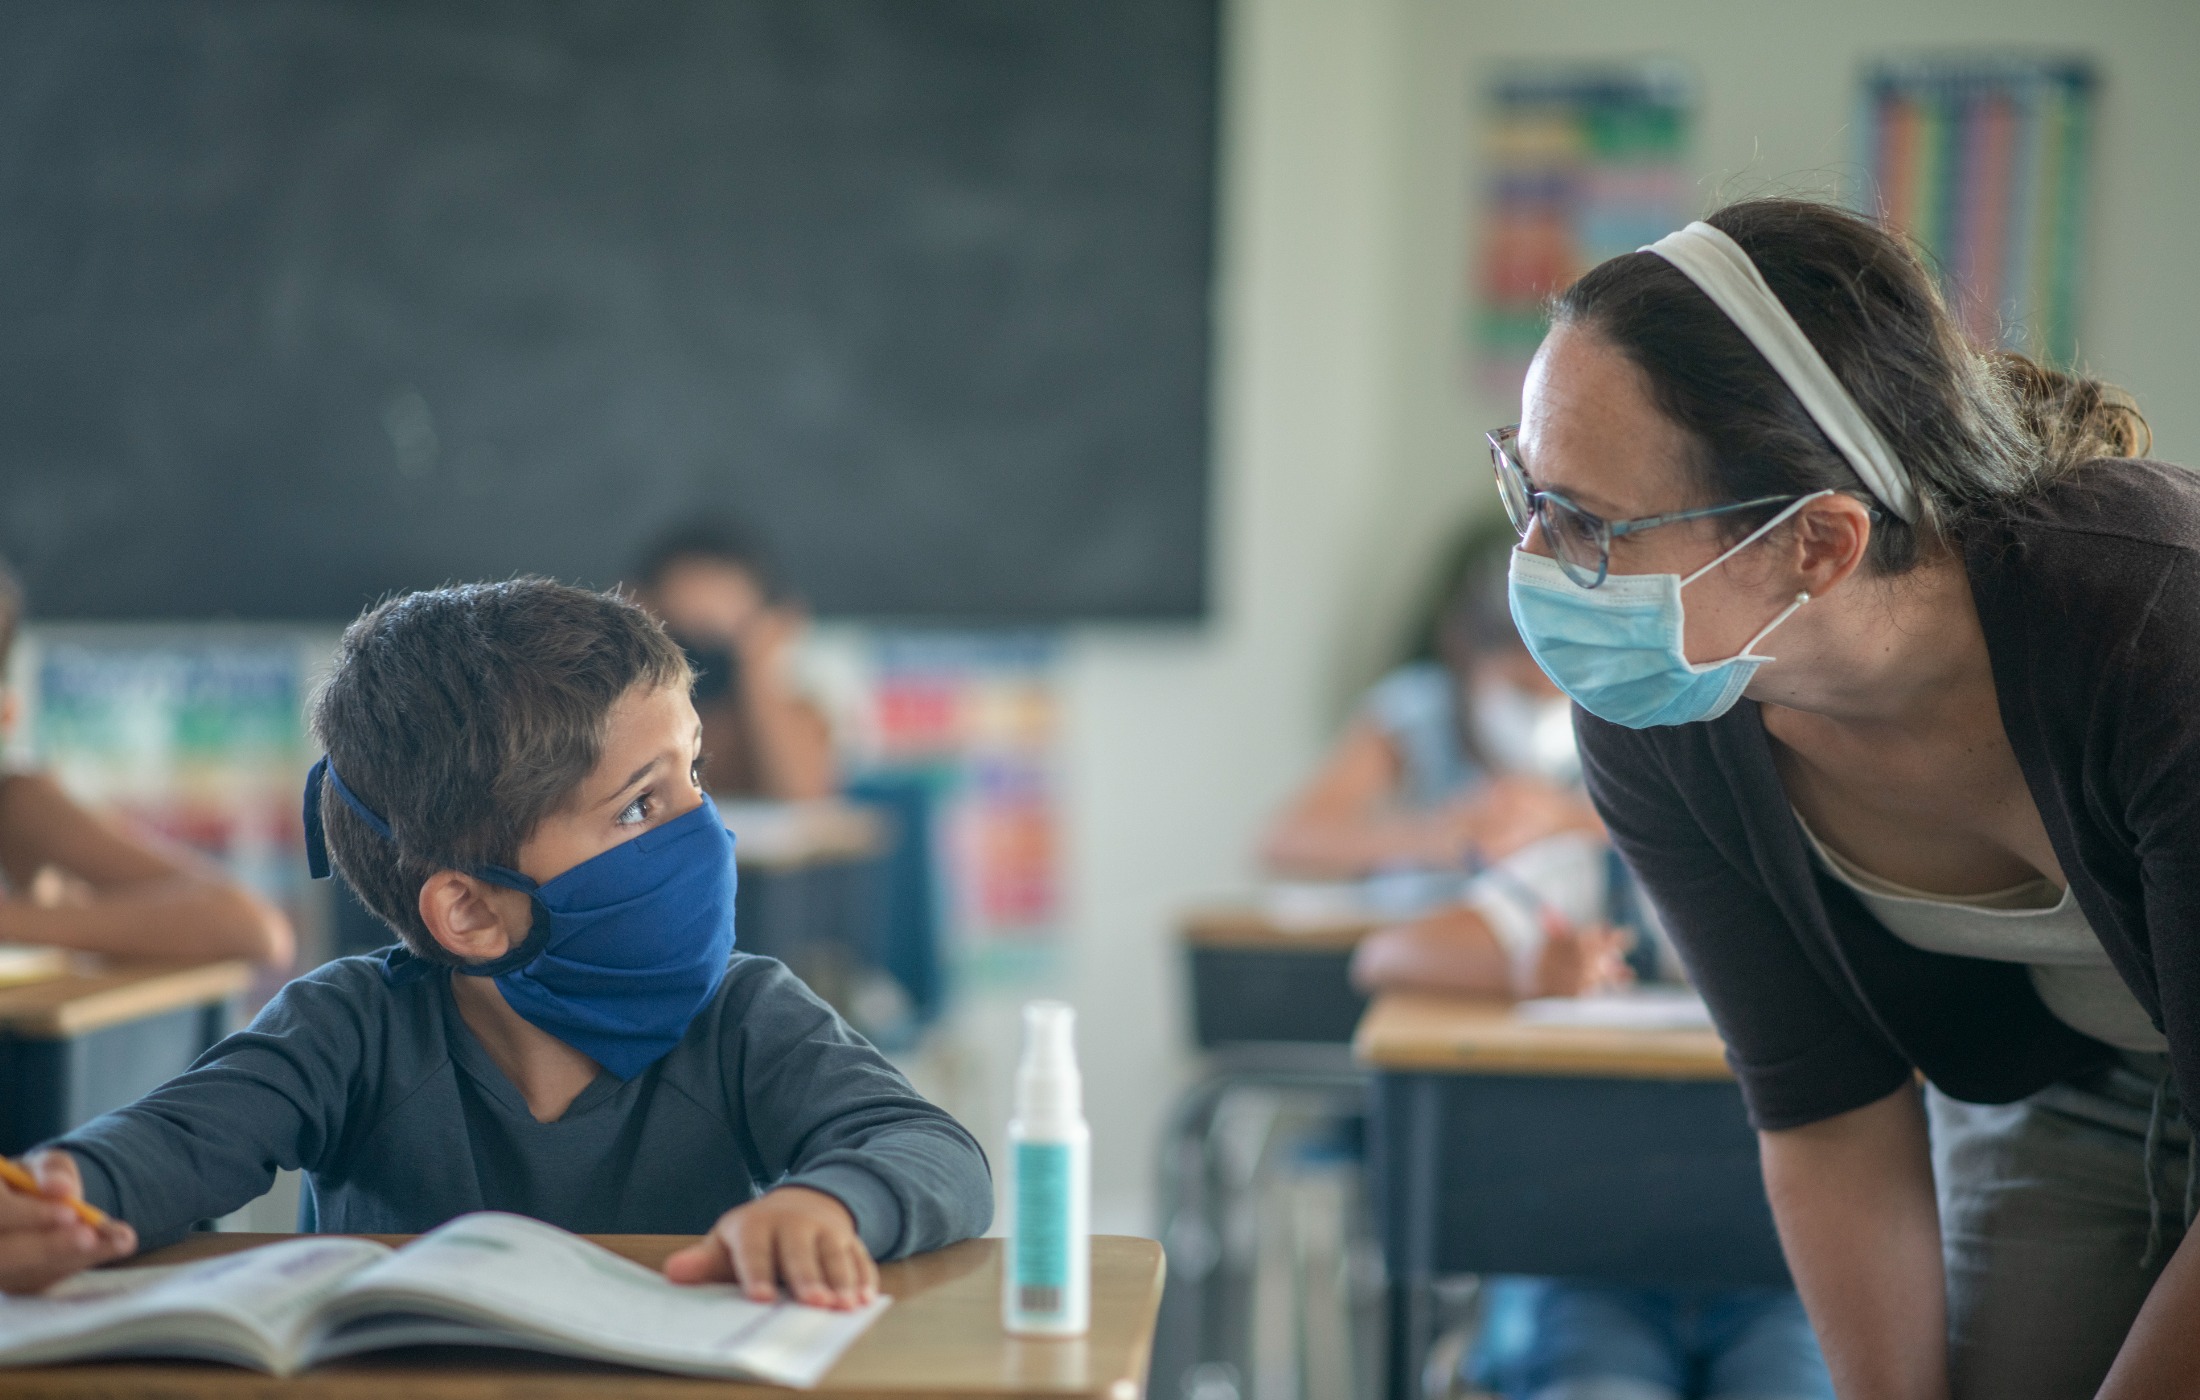 elementary-students-in-the-classroom-wearing-masks-picture-id1256576784